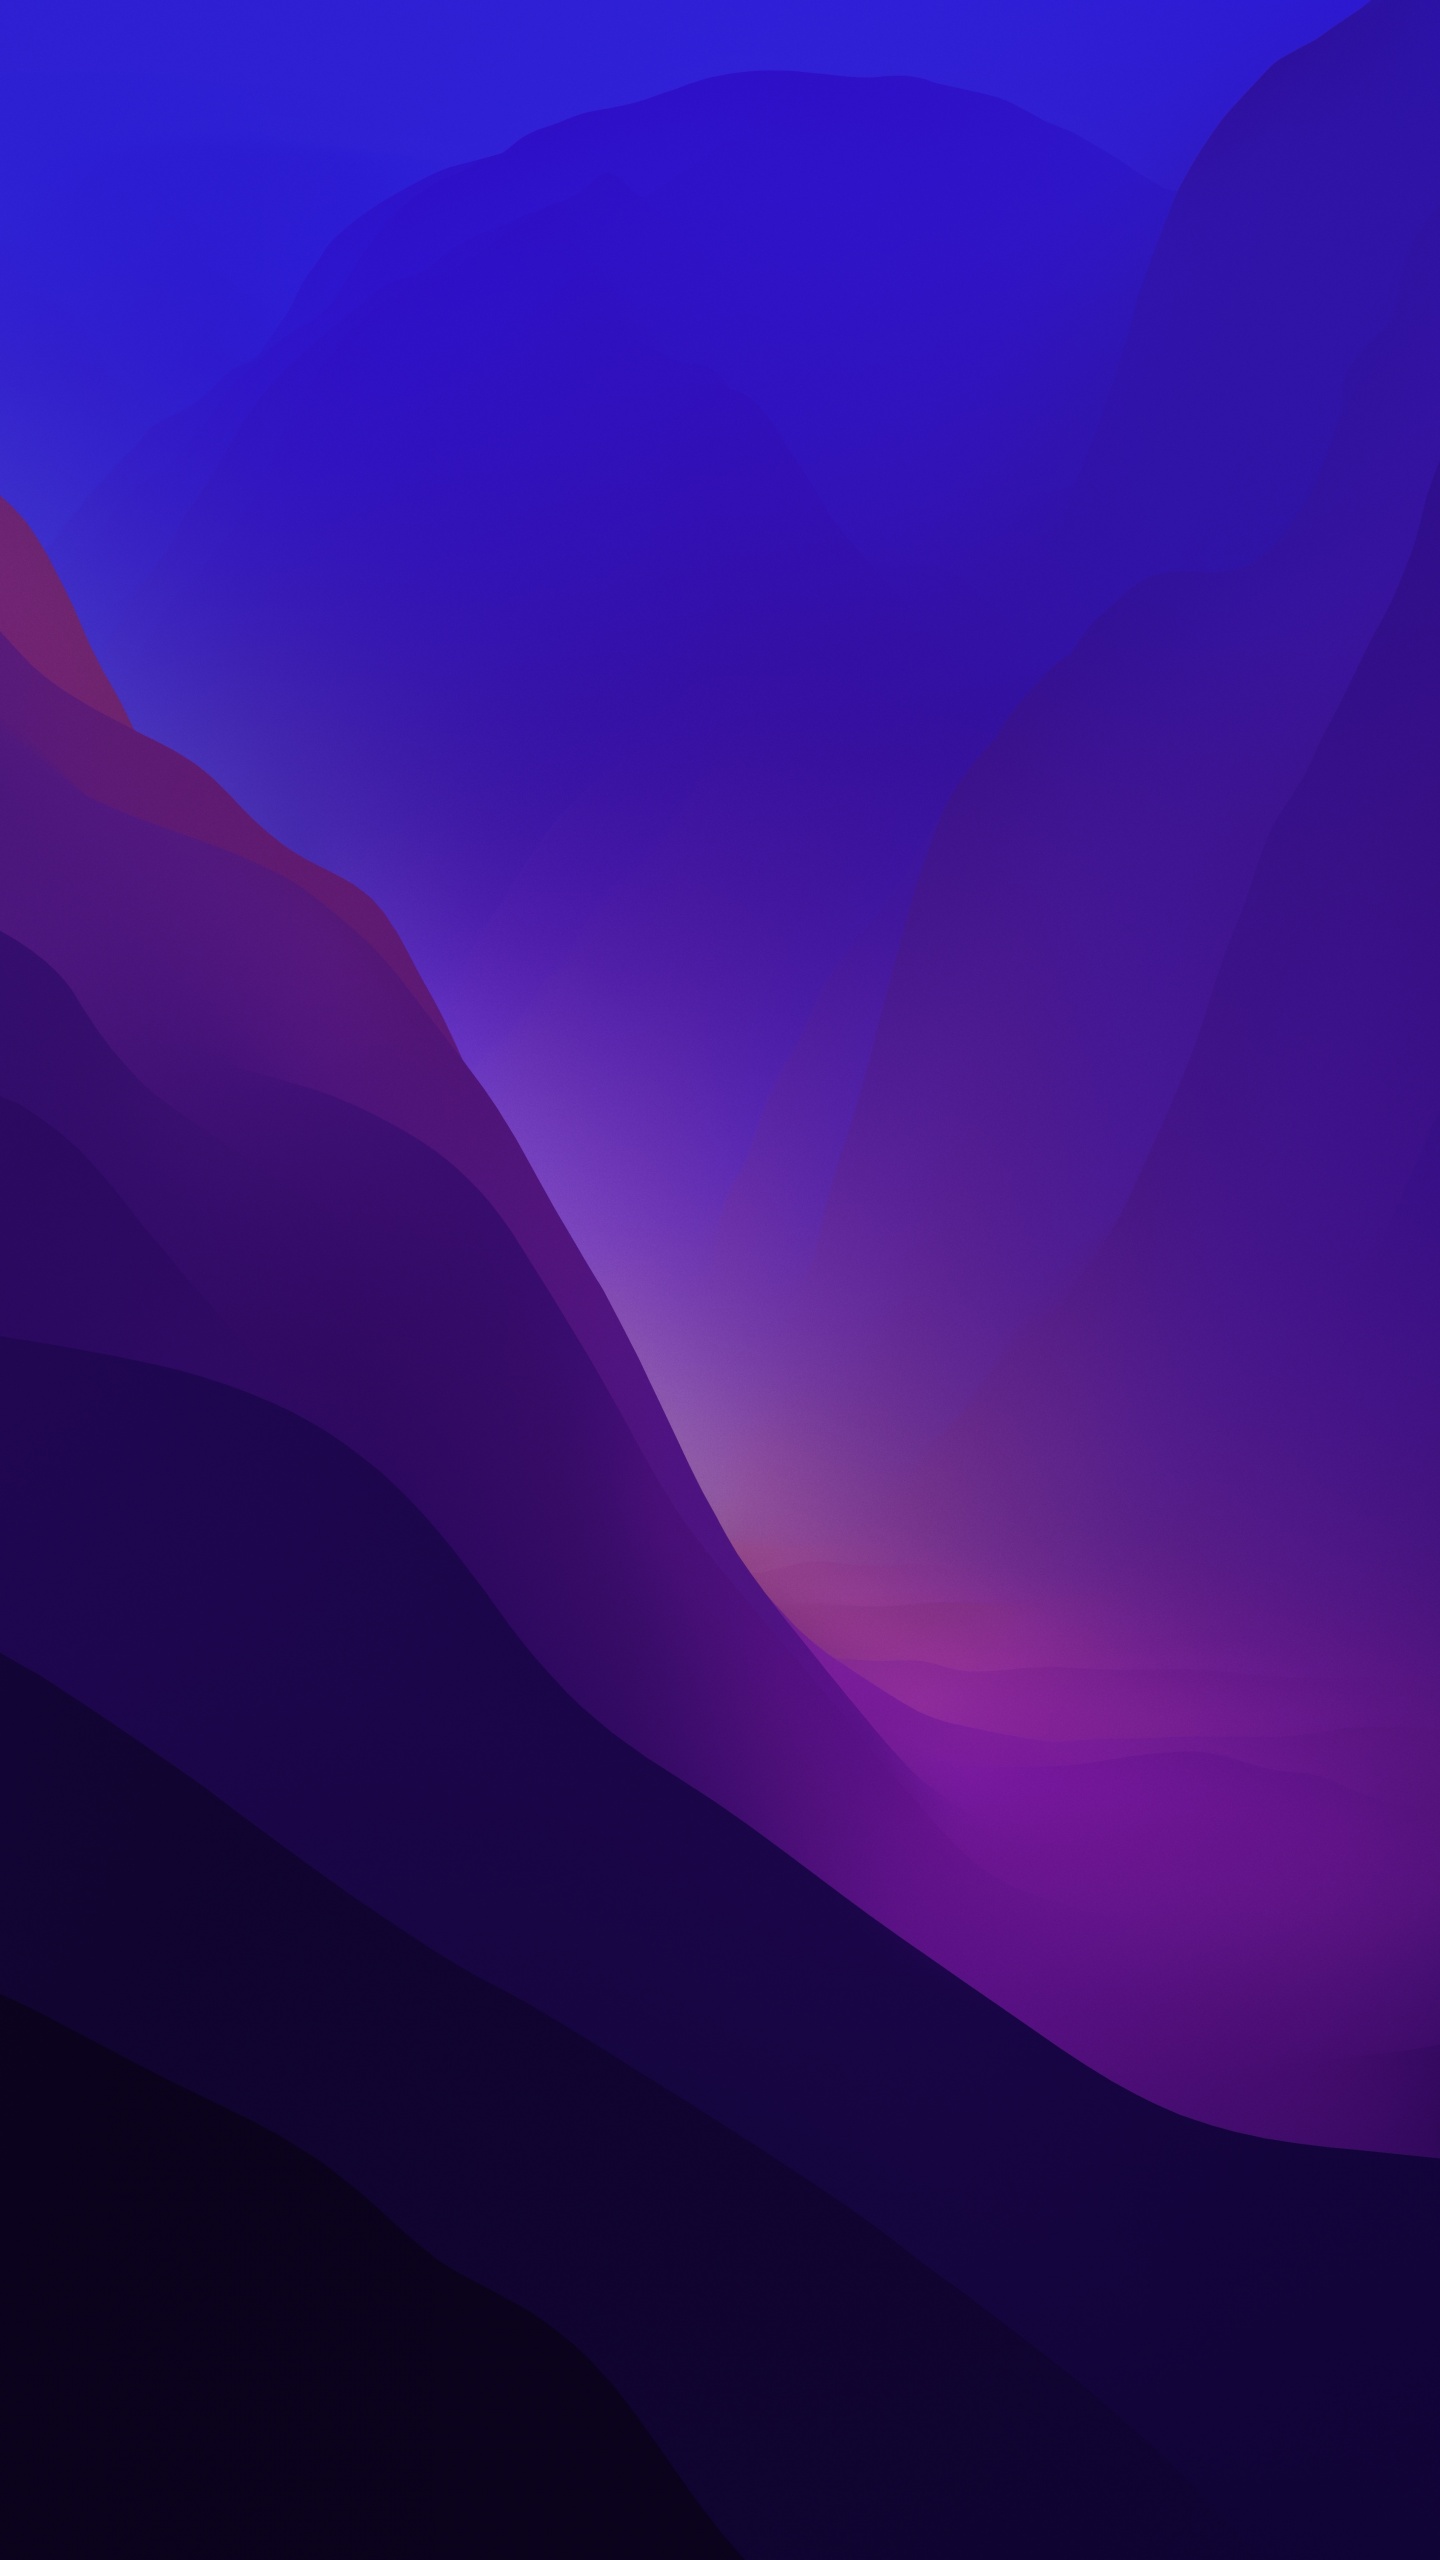 Download 700 Purple wallpaper 1440x2560 For your phone background